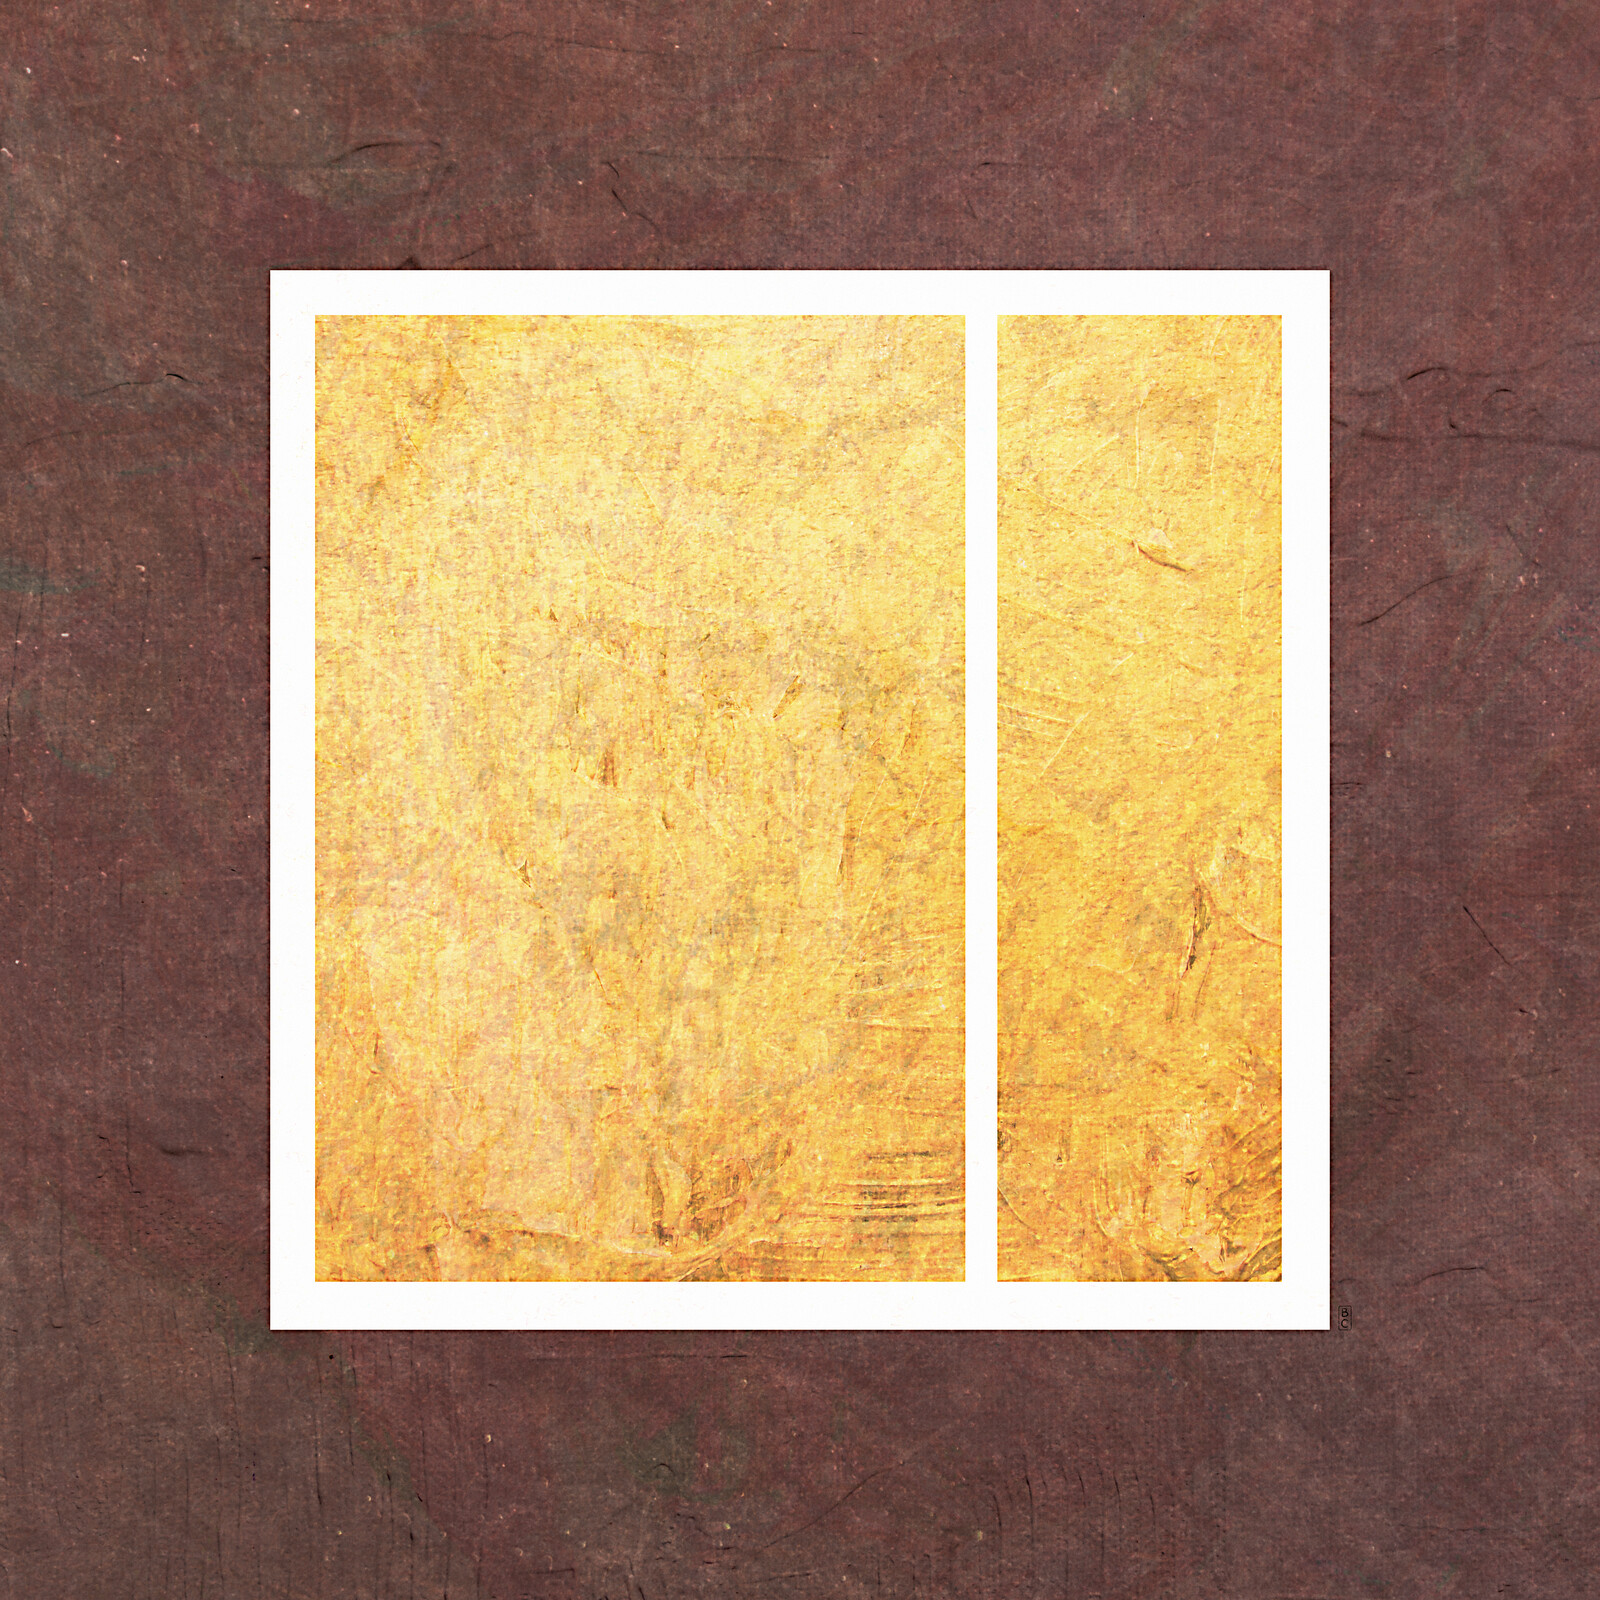 Two yellow rectangles (one wider, one thin) with a white border on a dark brown background.